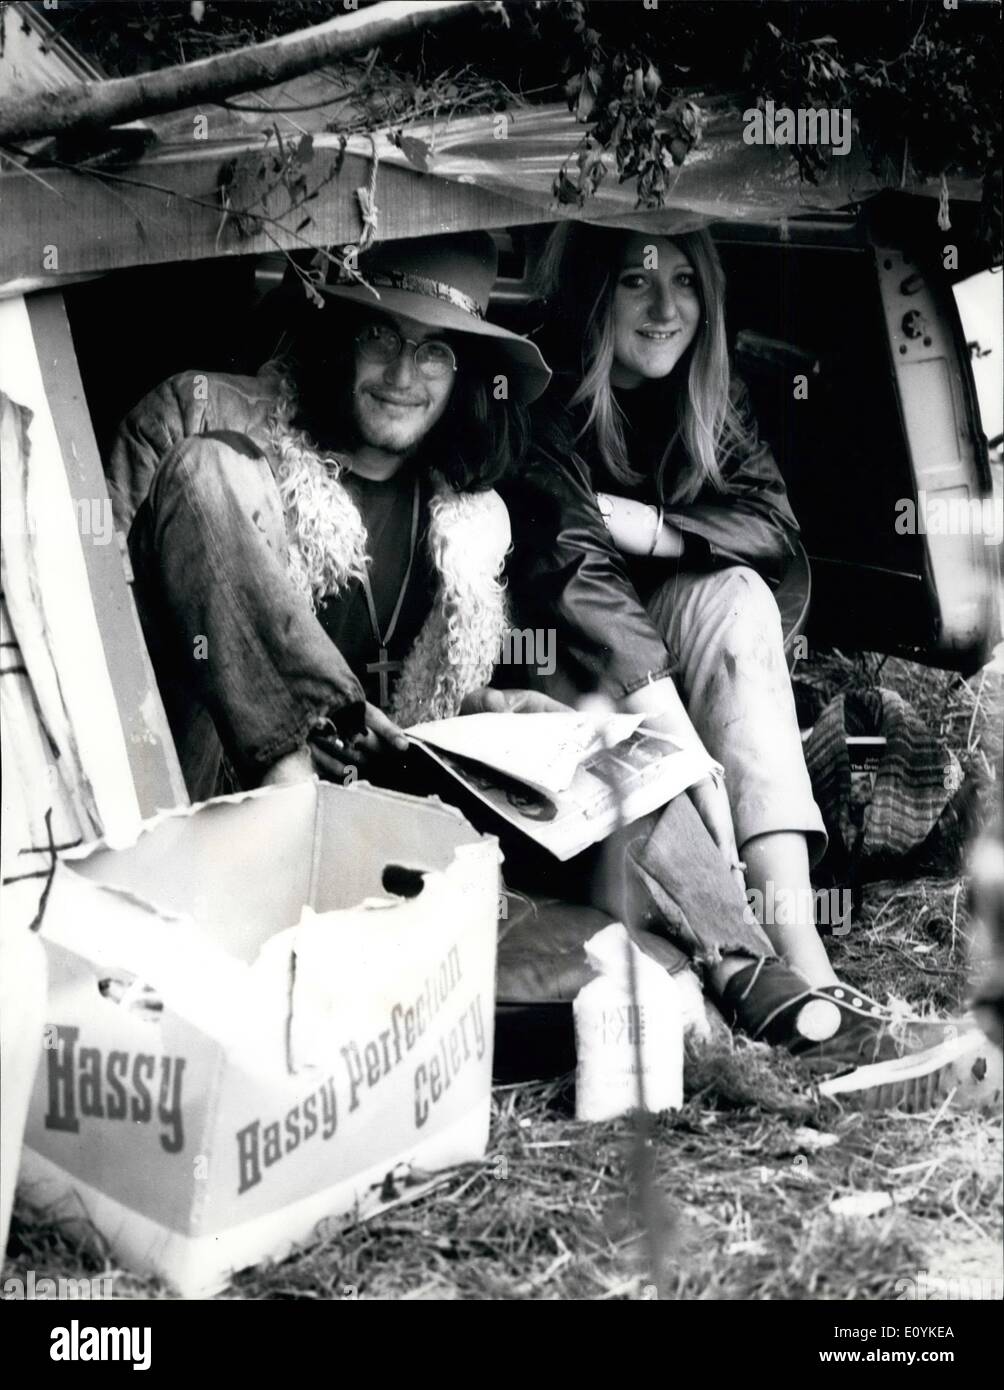 Aug. 08, 1970 - Pop Fans invade the Isle of Wight: Pop fans from all parts of the world are gathering at Freshwater, Isle of Wight, for the five day pop festival, which opened today. Photo shows two pop fans take things easy on the camping site at Freshwater, Isle of Wight. Stock Photo